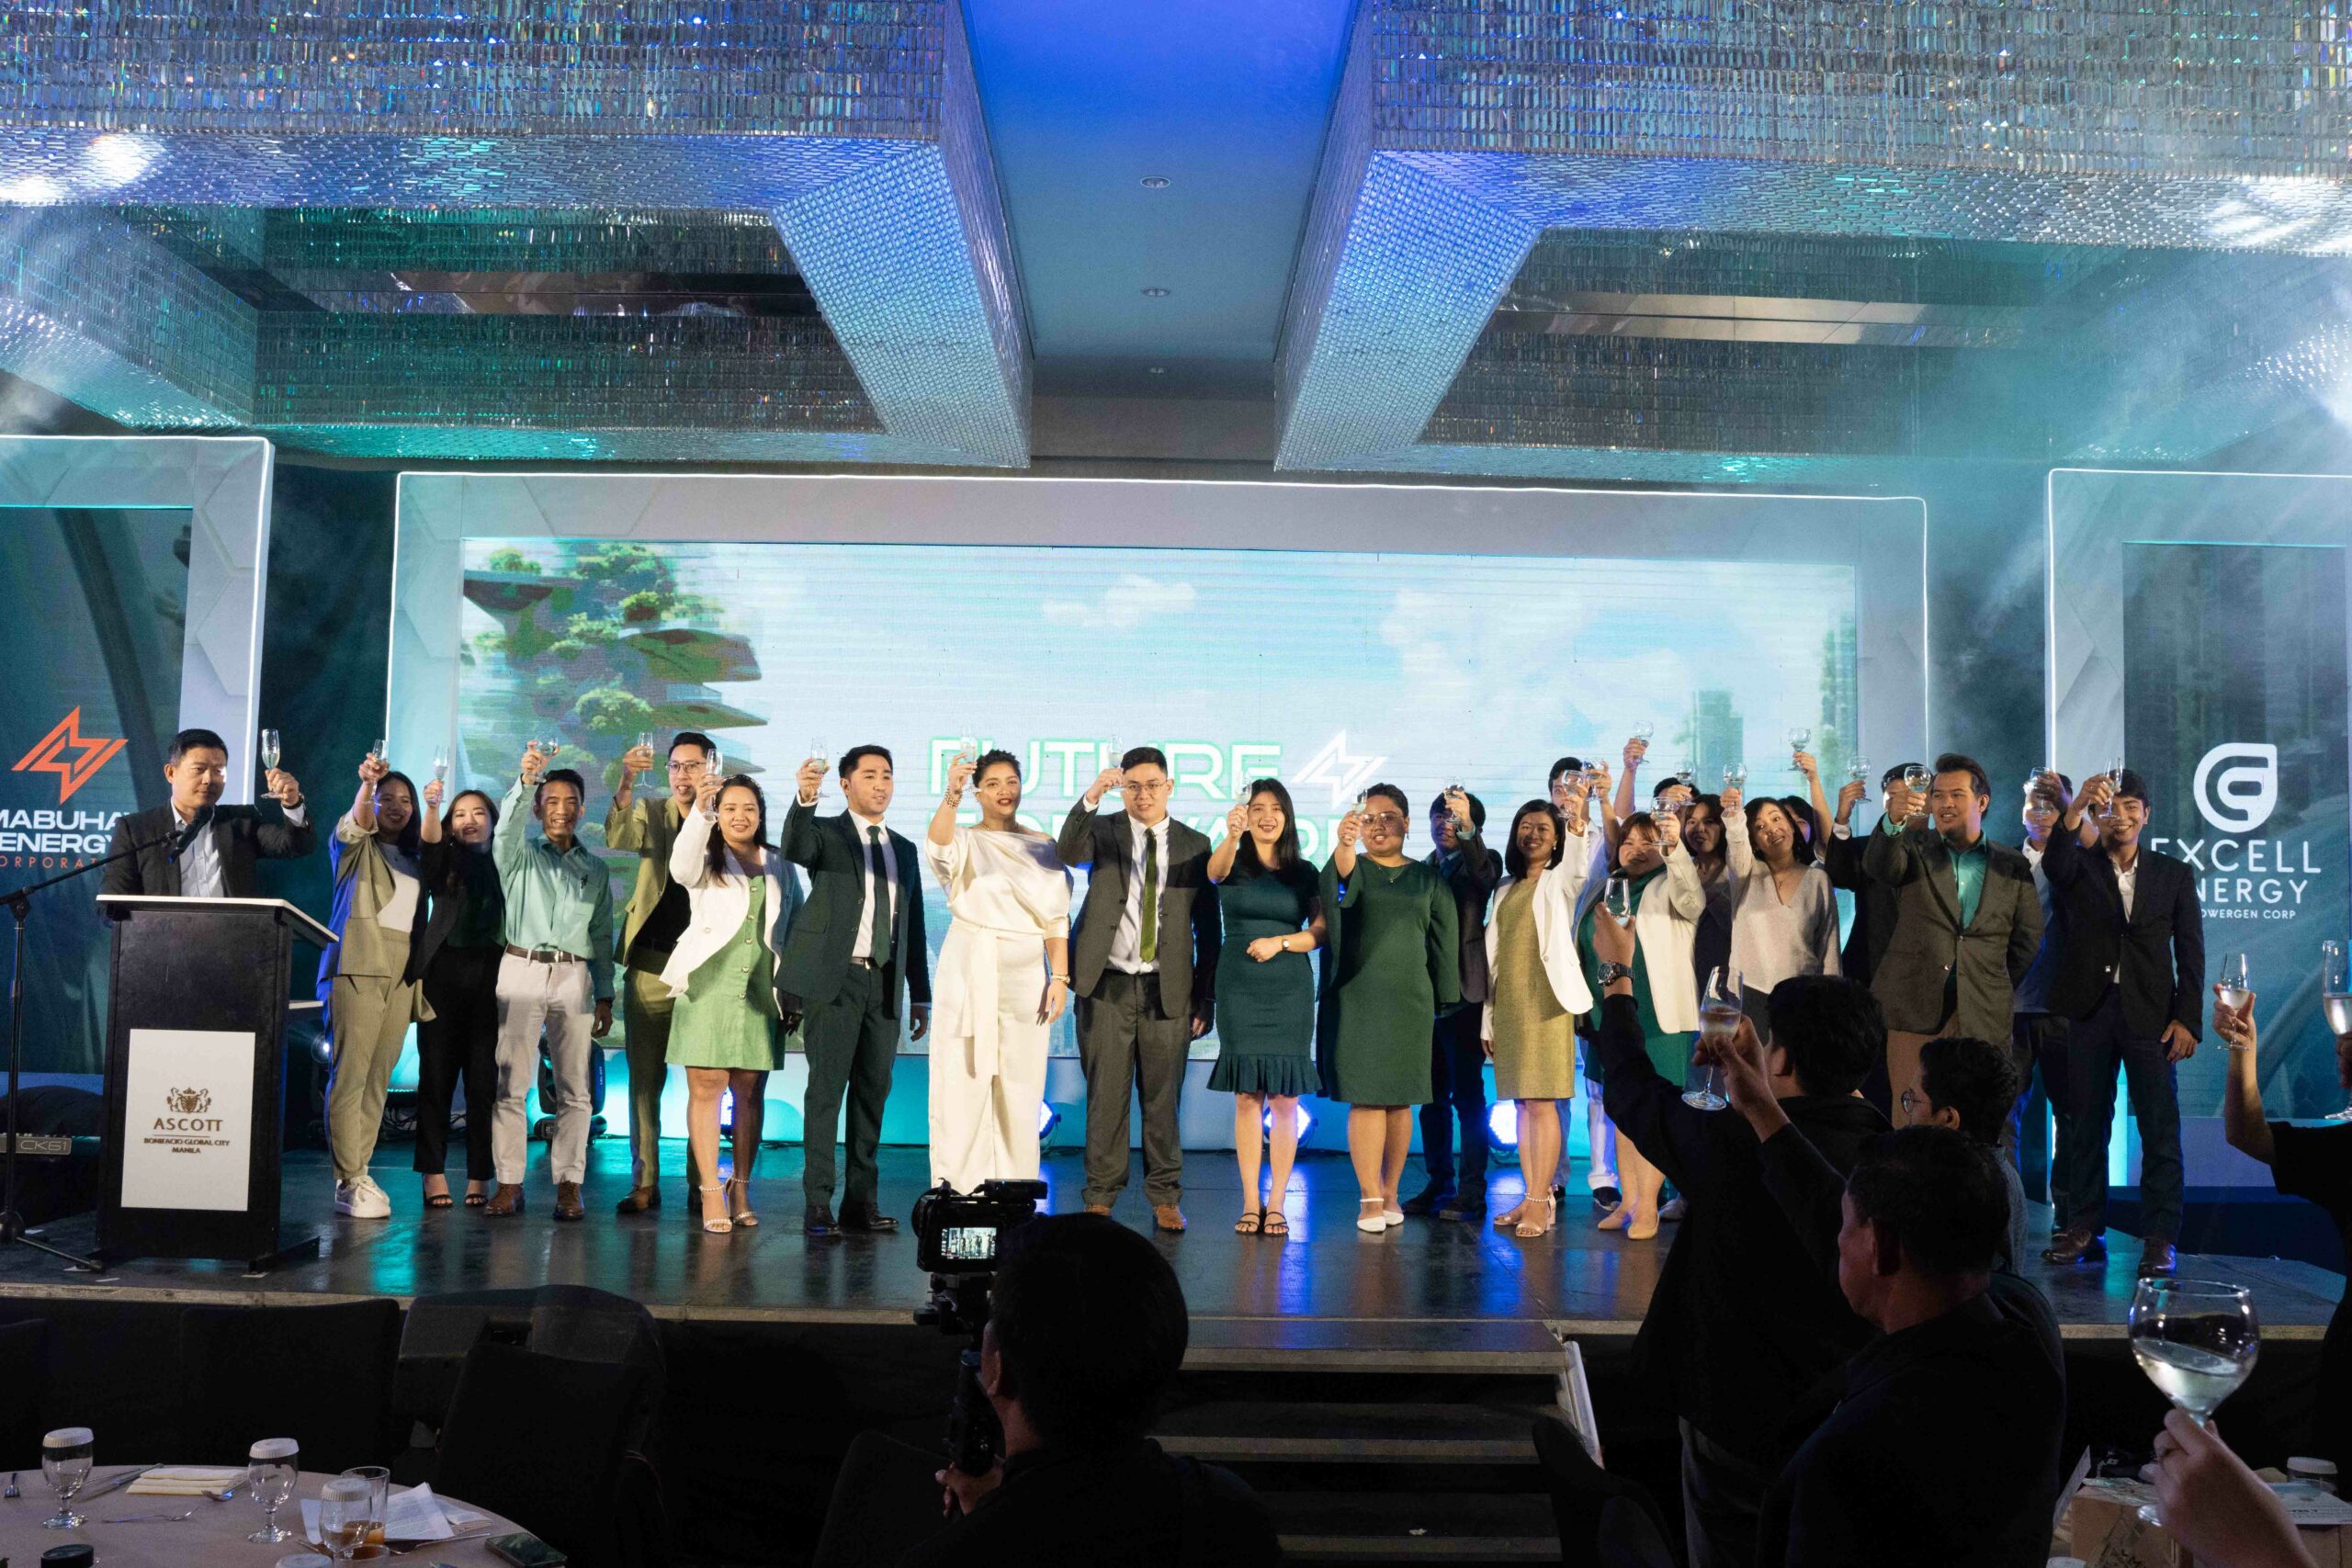 Future Forward 2023: The First Partners’ Night of Mabuhay Energy and Excell Energy